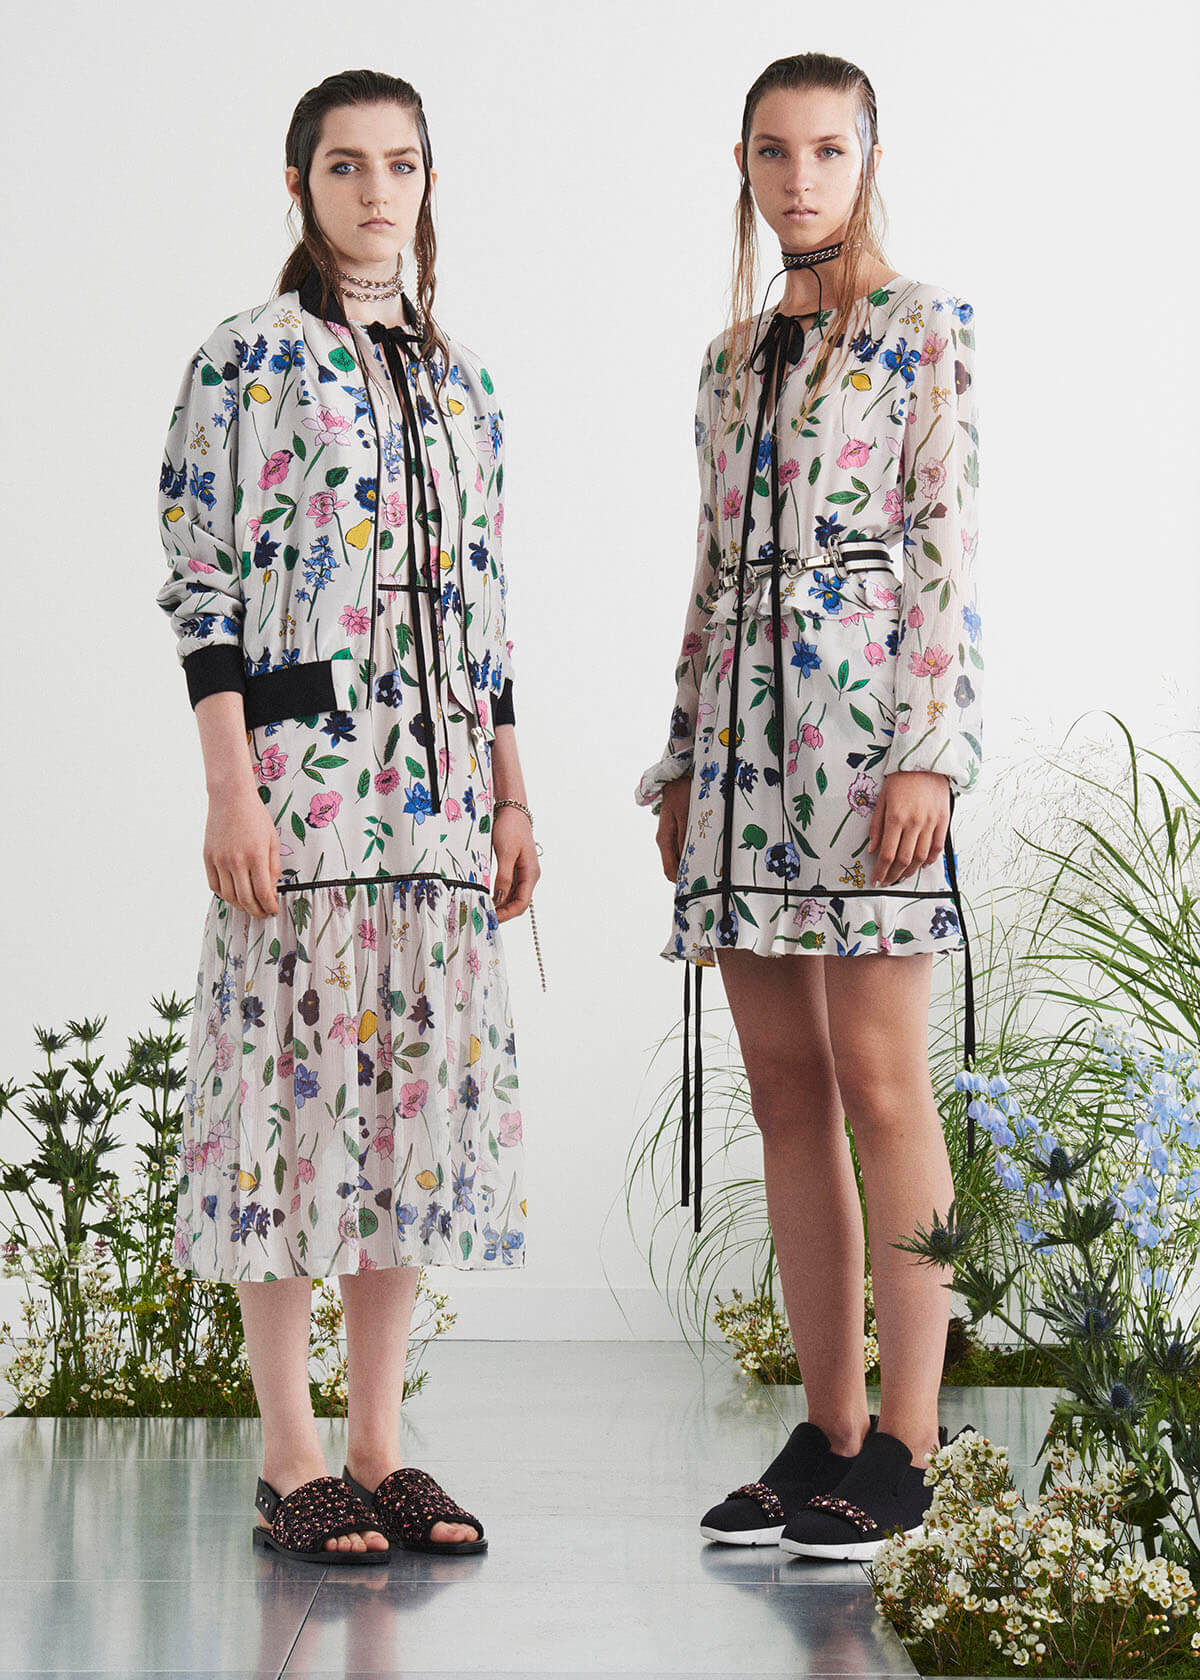 playful floral designs for Markus Lupfer's SS17 womenswear collection as shown on models